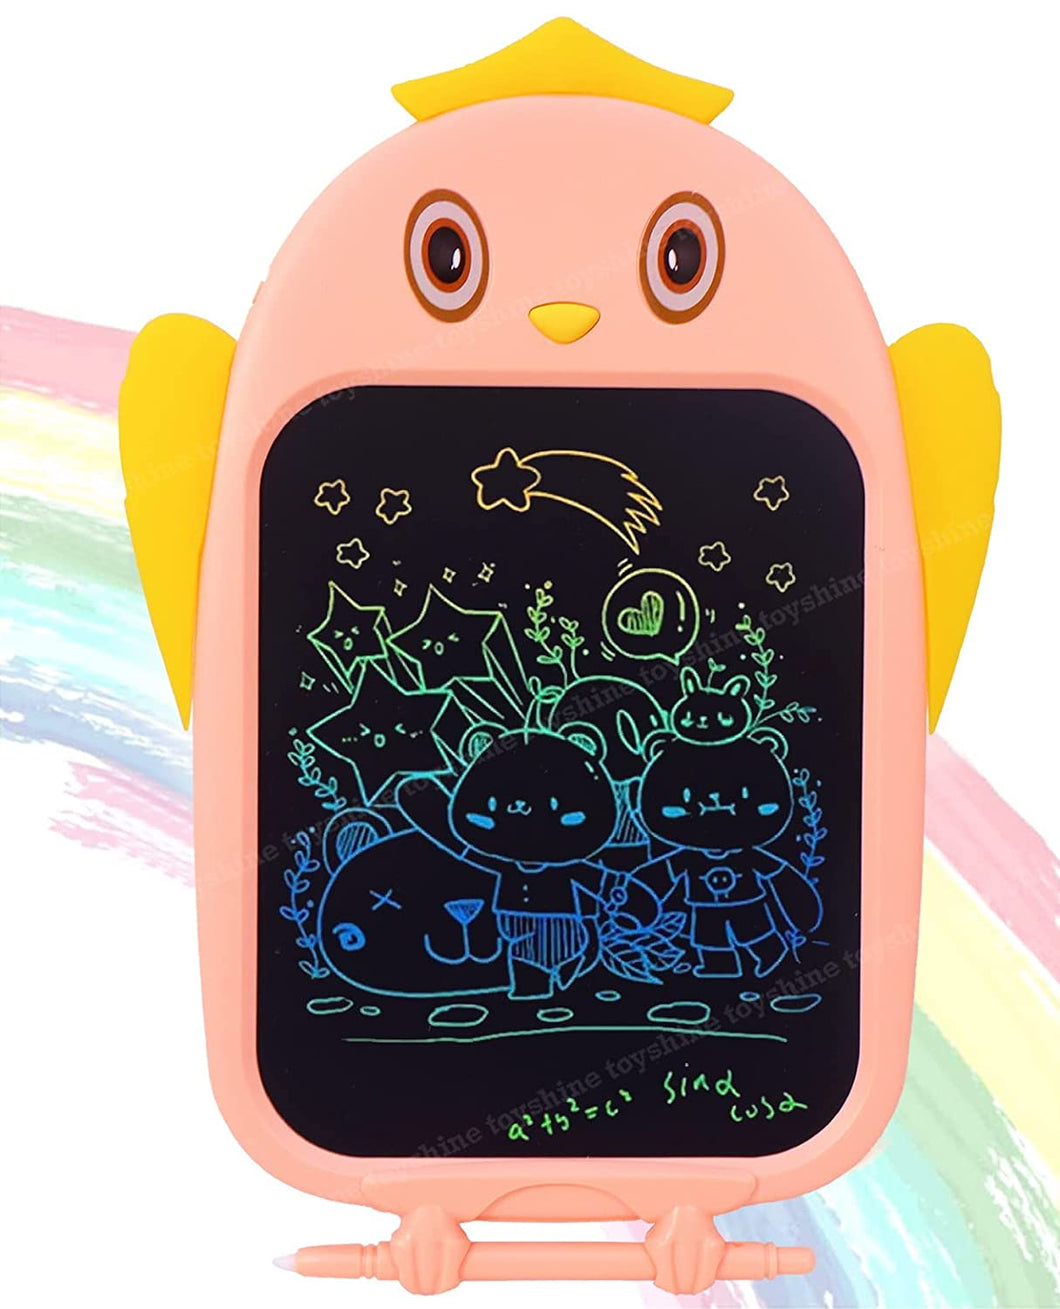 Toyshine Writing Tablet 8.5 Inch Colorful Screen Doodle Board for ges 3+ Kids Toys, Electronic Drawing Board Kids Doodle Pad Educational and Learning Toys Girls Boys Gifts Pink M3